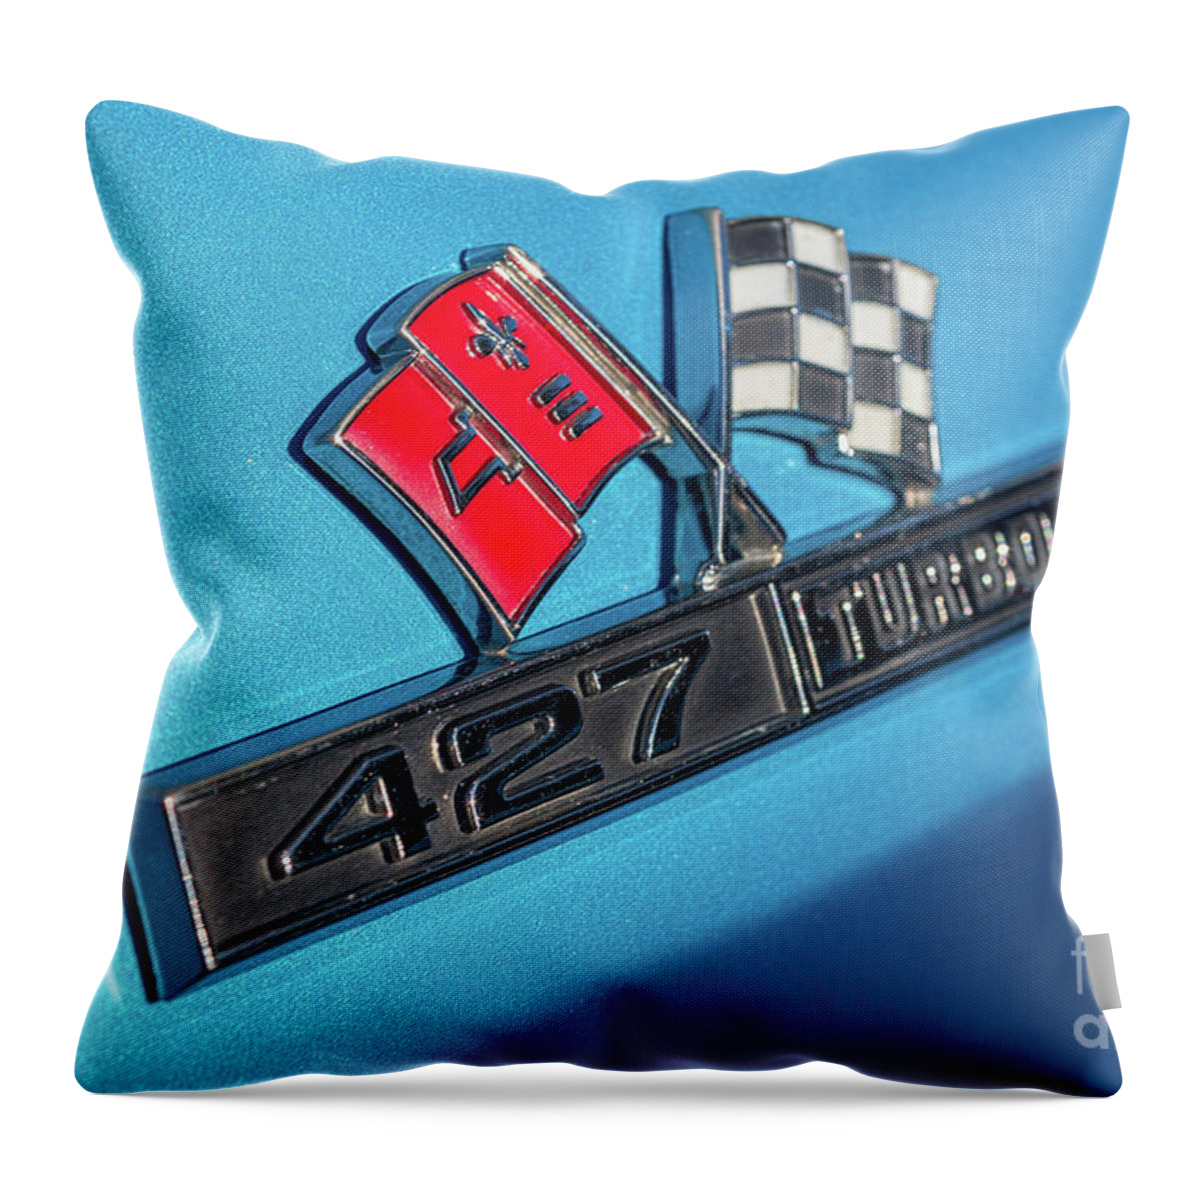 Chevy Throw Pillow featuring the photograph 1965 Blue Corvette 427 Turbo Jet Emblem by Aloha Art